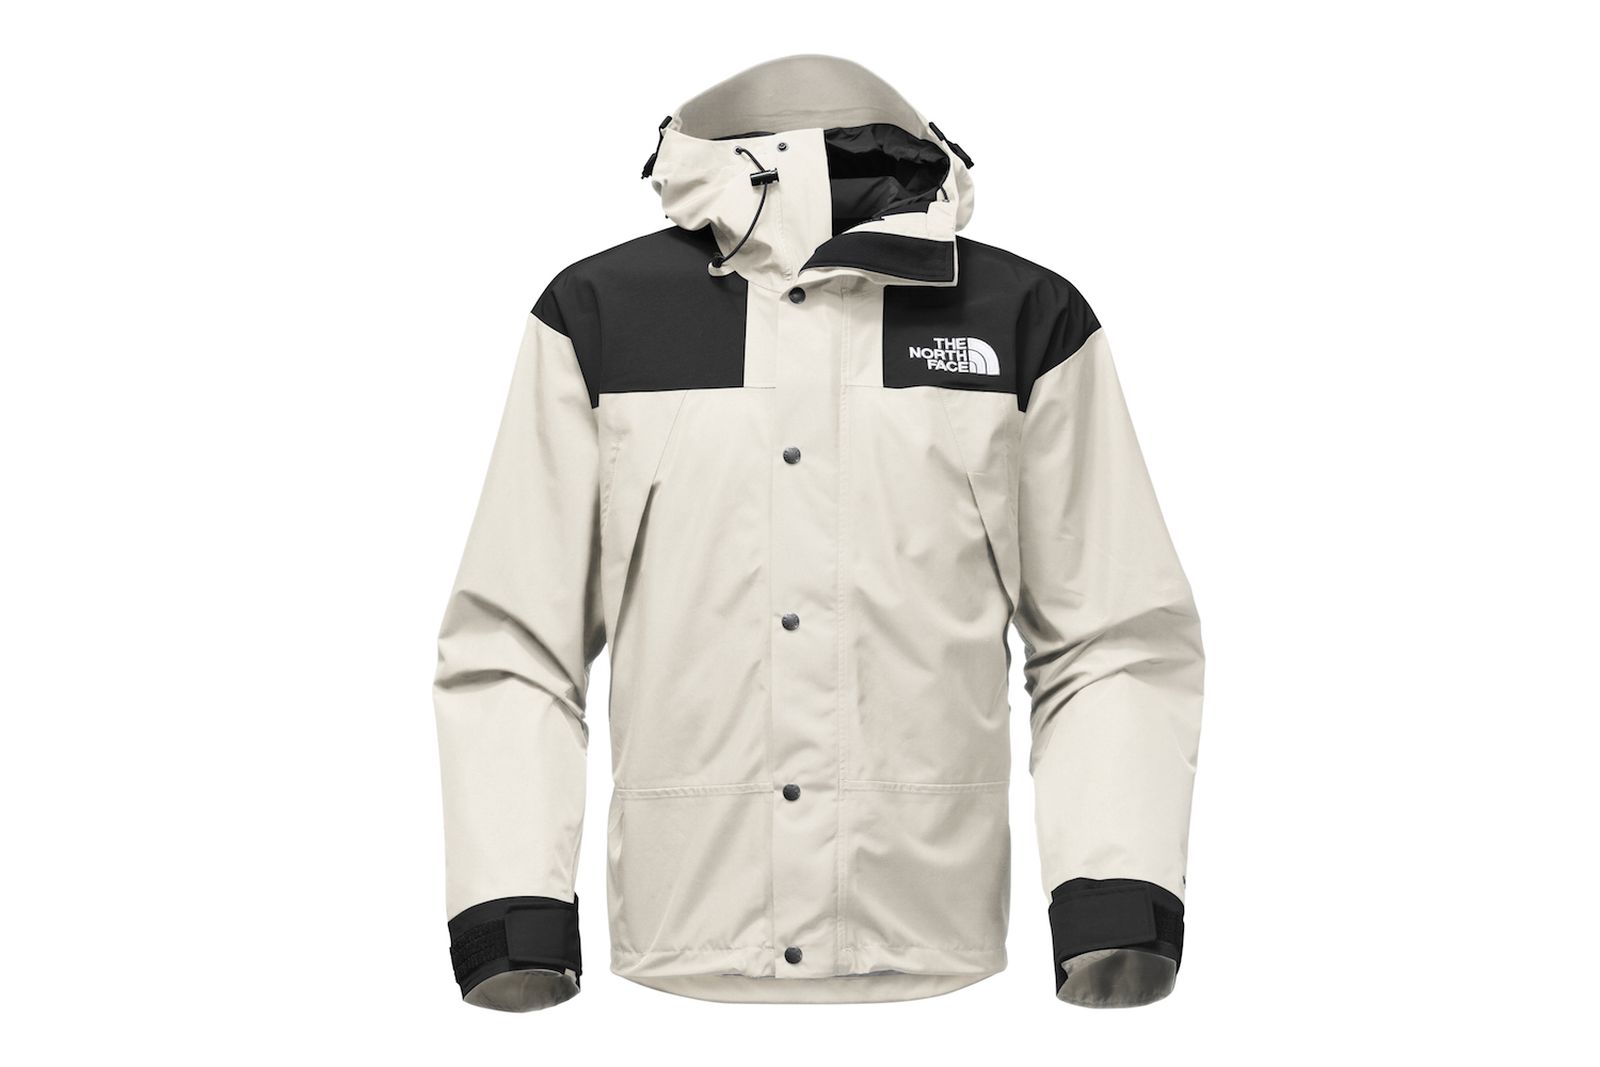 The North Face 1990 MOUNTAIN JACKET